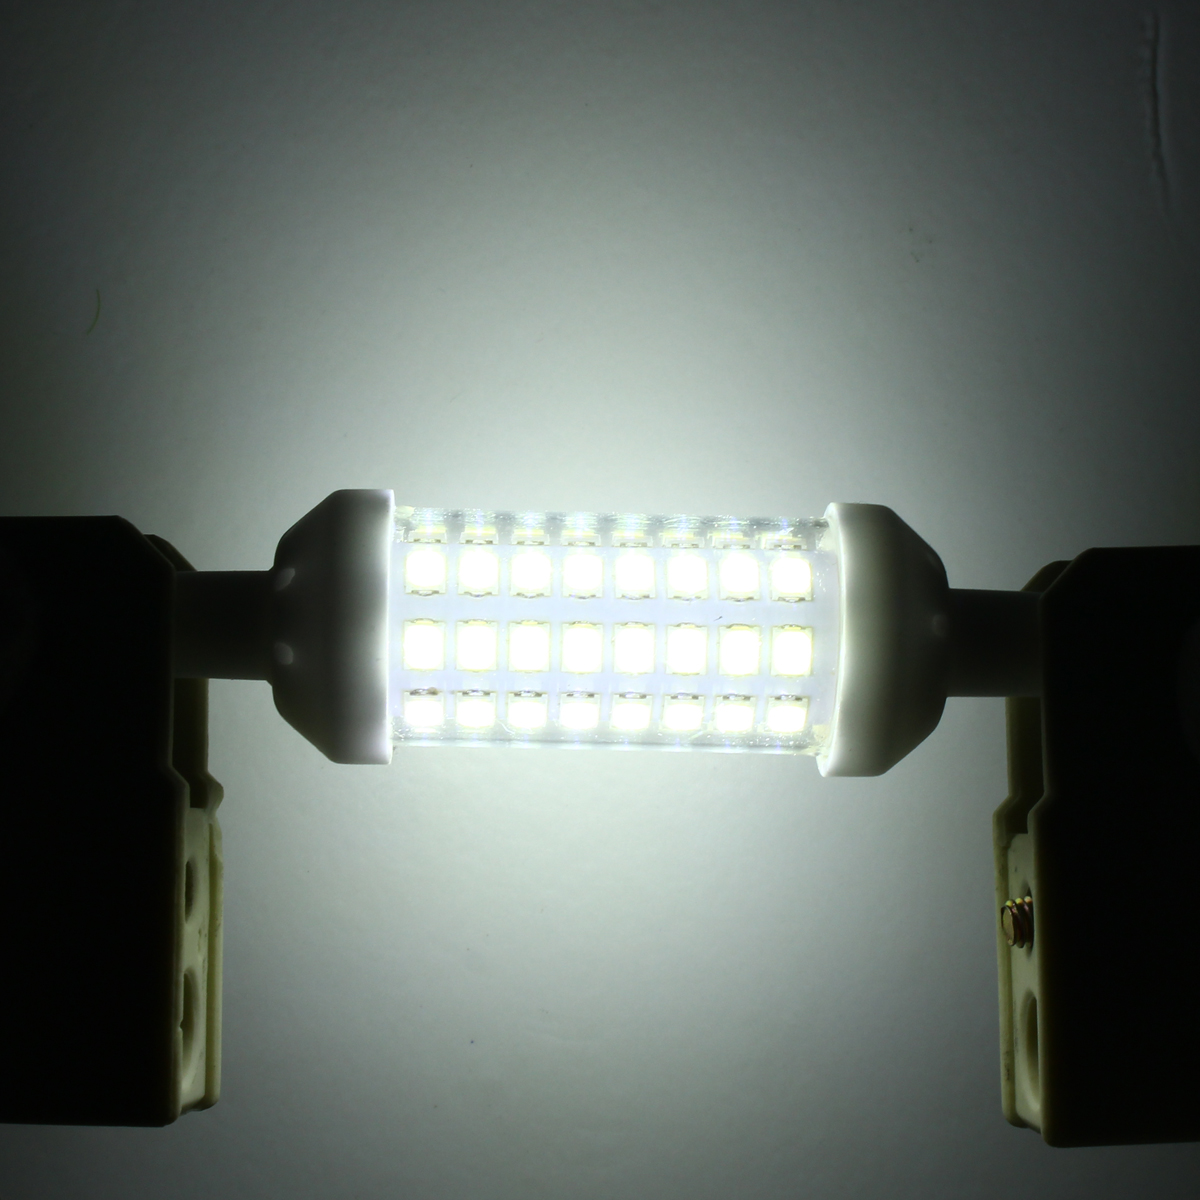 6W-R7S-2835-SMD-Non-dimmable-LED-Flood-Light-Replaces-Halogen-Lamp-Ceramics--High-Bright-AC220-265V-1282825-8